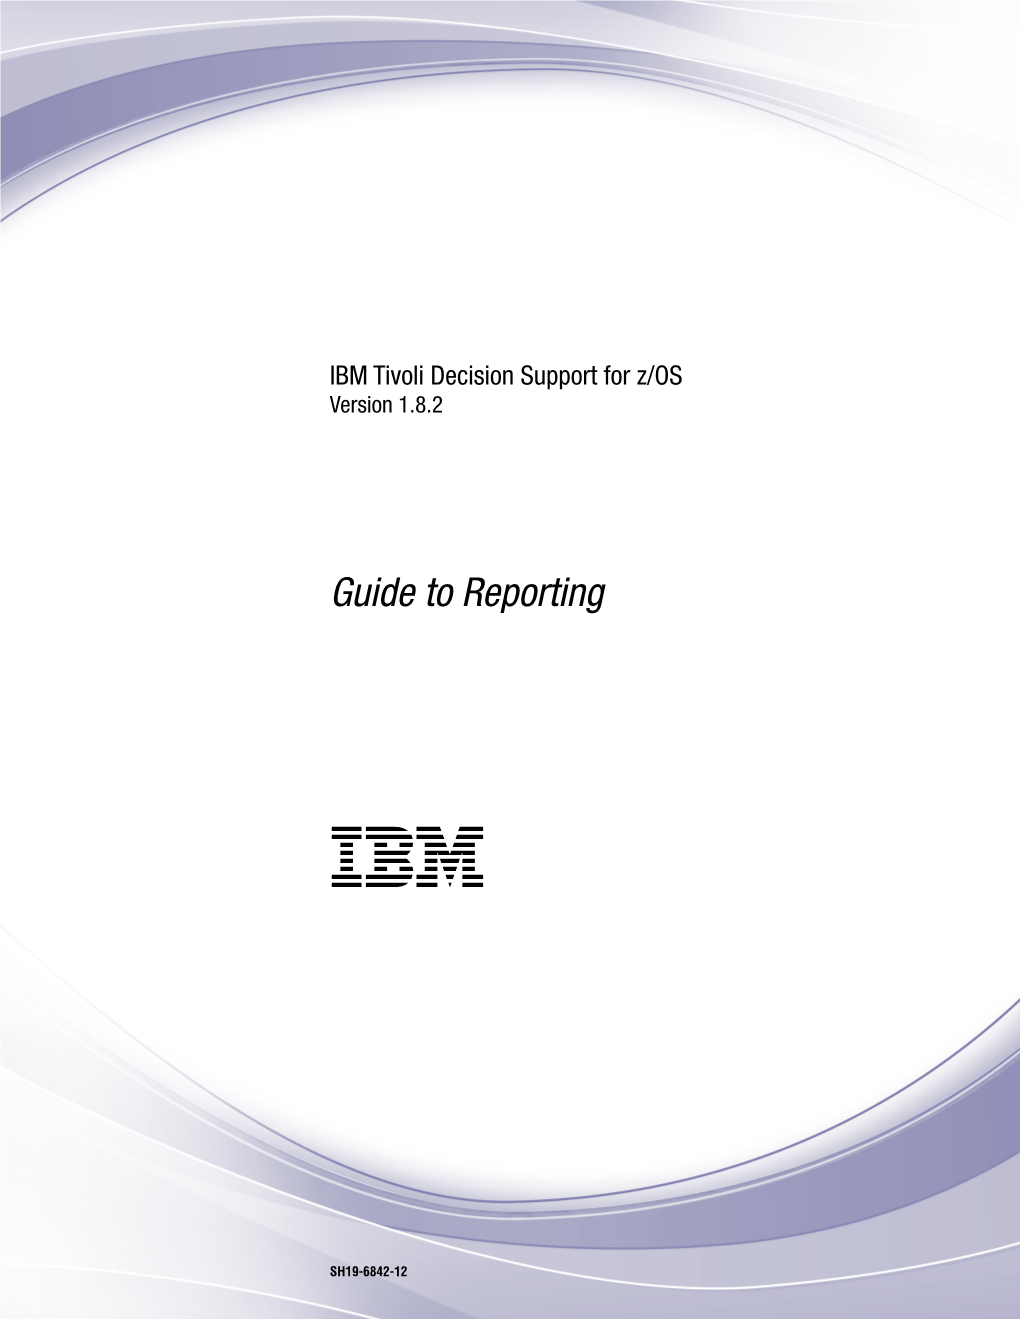 IBM Tivoli Decision Support for Z/OS: Guide to Reporting Figures